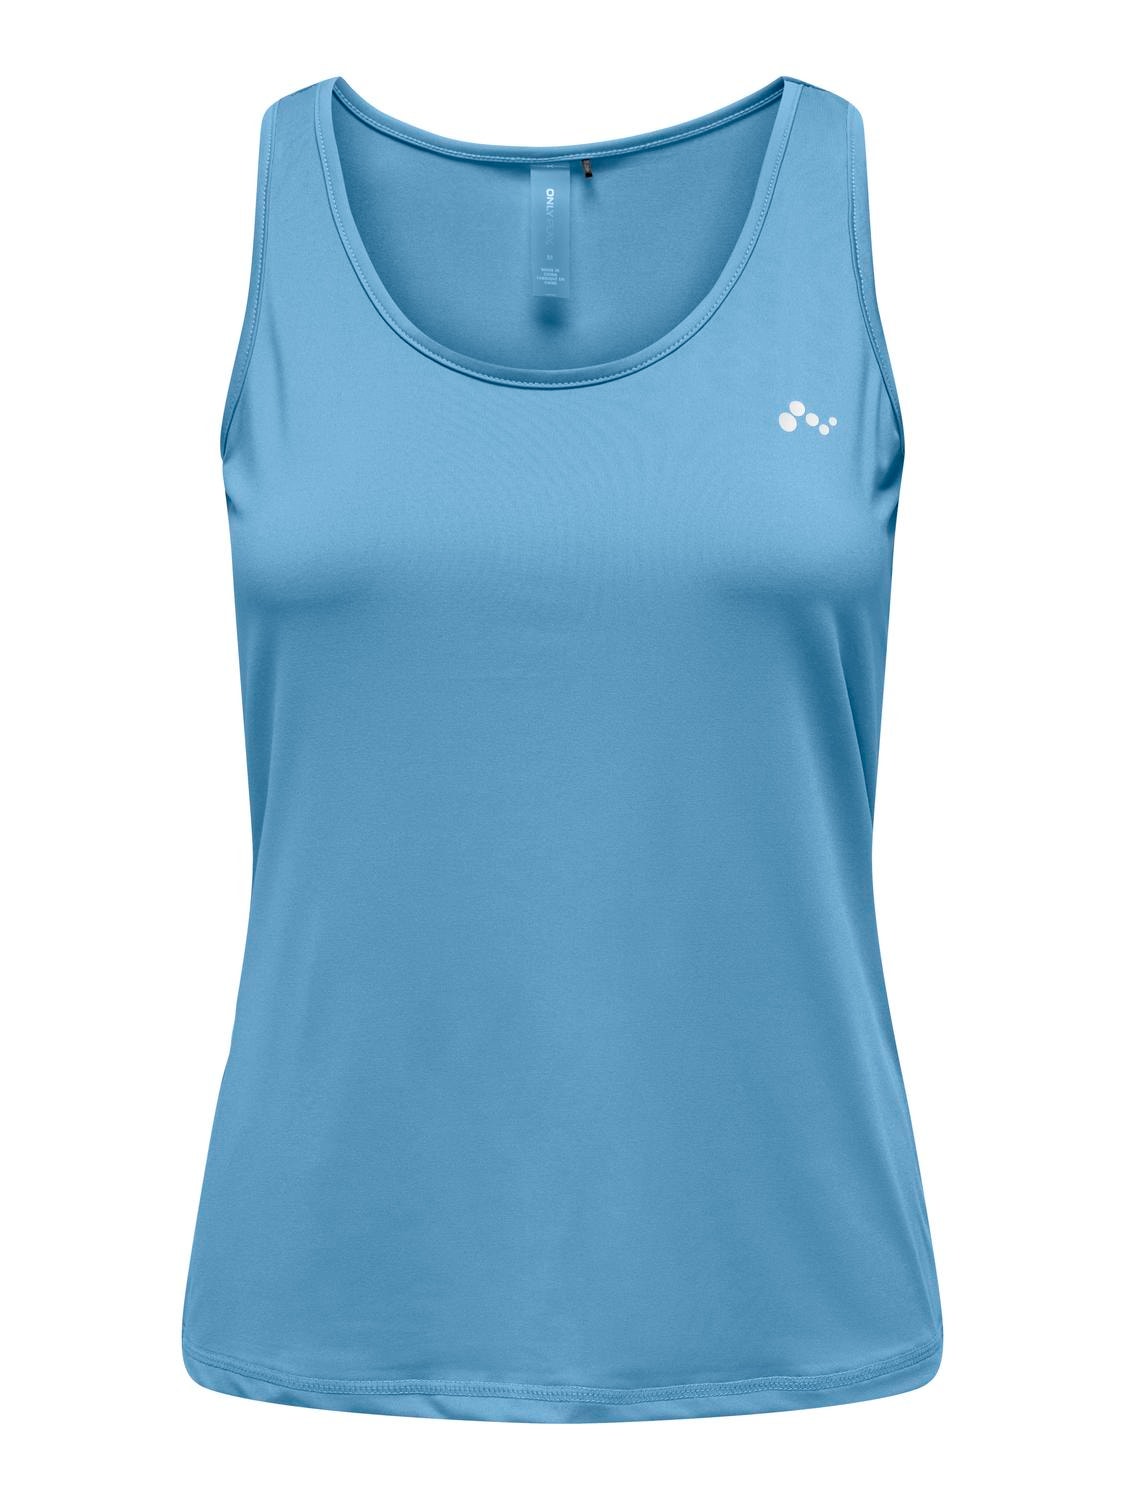 ONLY Training tank top -Blissful Blue - 15281099